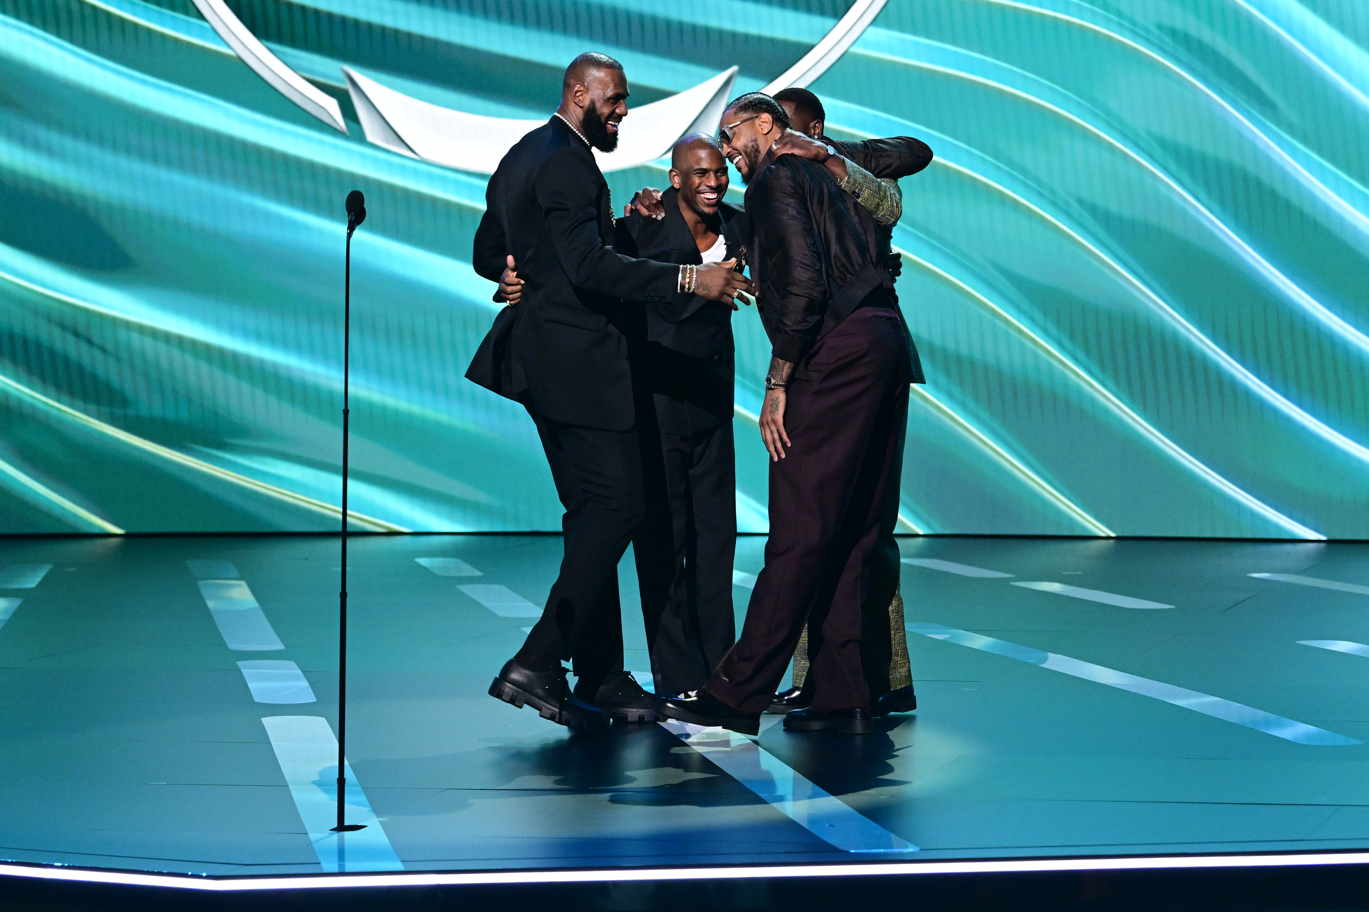 Inside The 2023 ESPYs With Carmelo Anthony, LeBron James + More